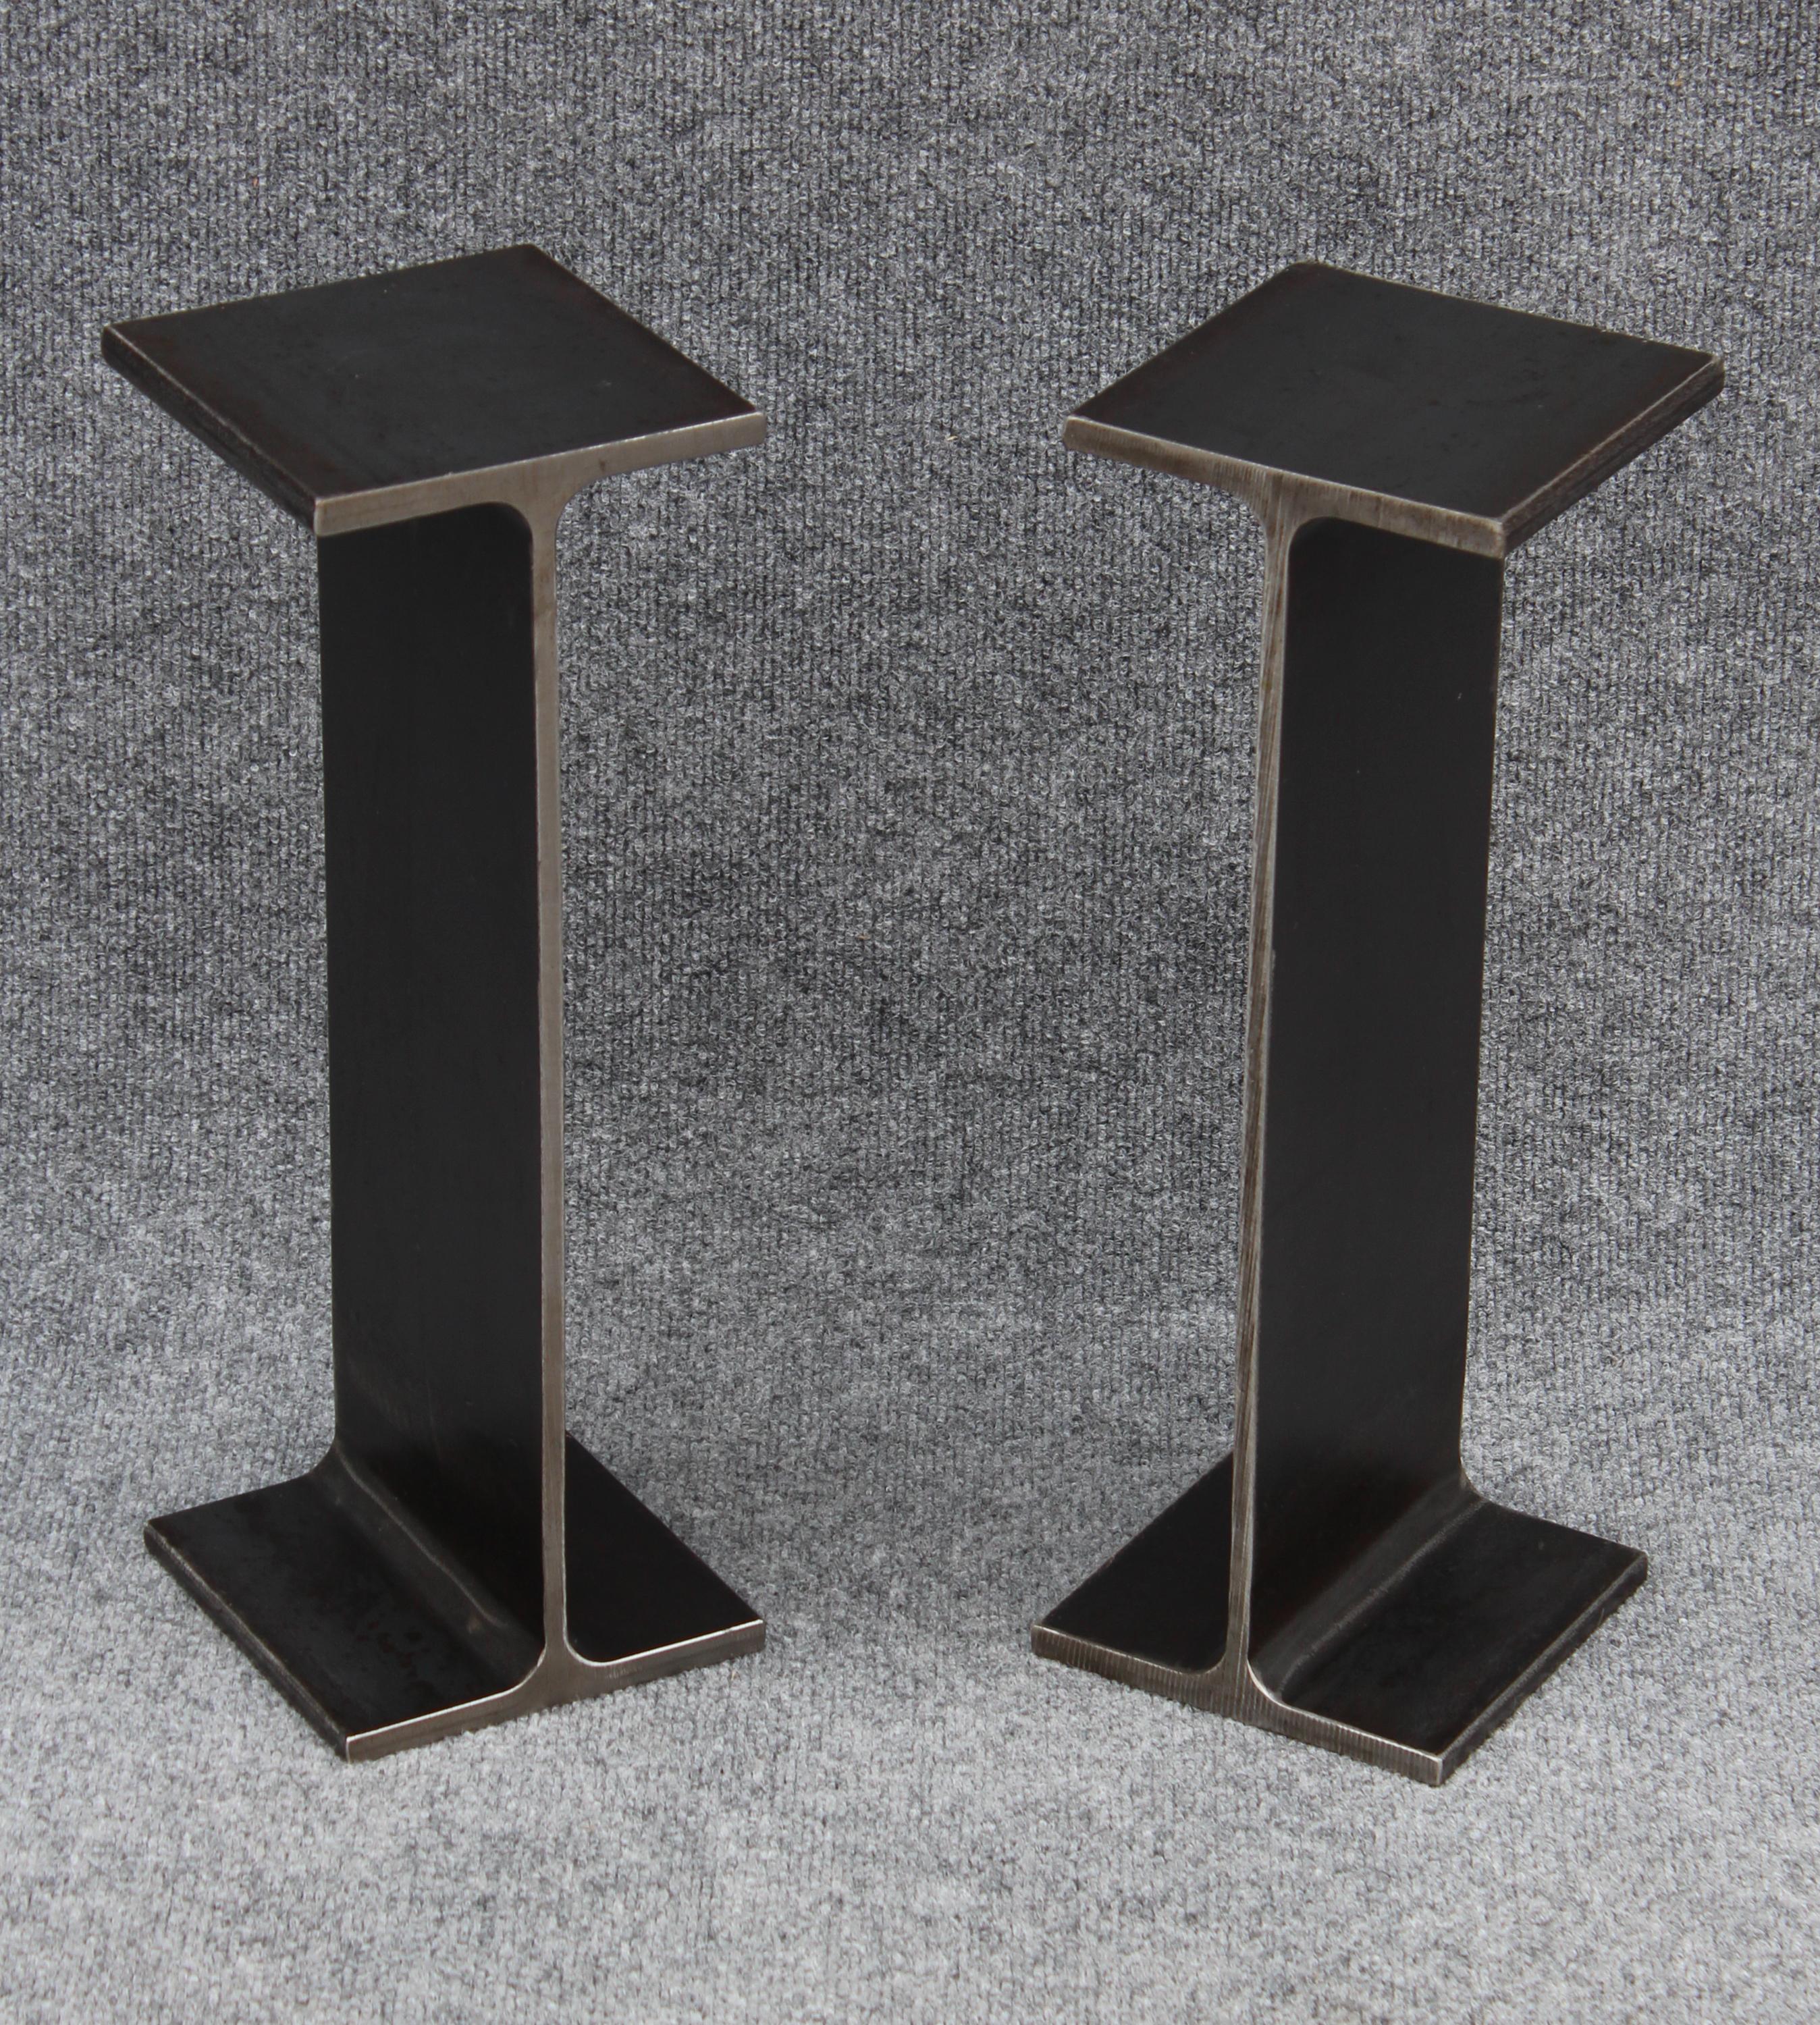 In creating a prototype, Ward Bennett actually cut off a section of a steel I-beam to achieve the raw aesthetic he was after. Here, a pair of solid enameled steel drink stands after his innovative design. Each is very well made, with crisp surfaces